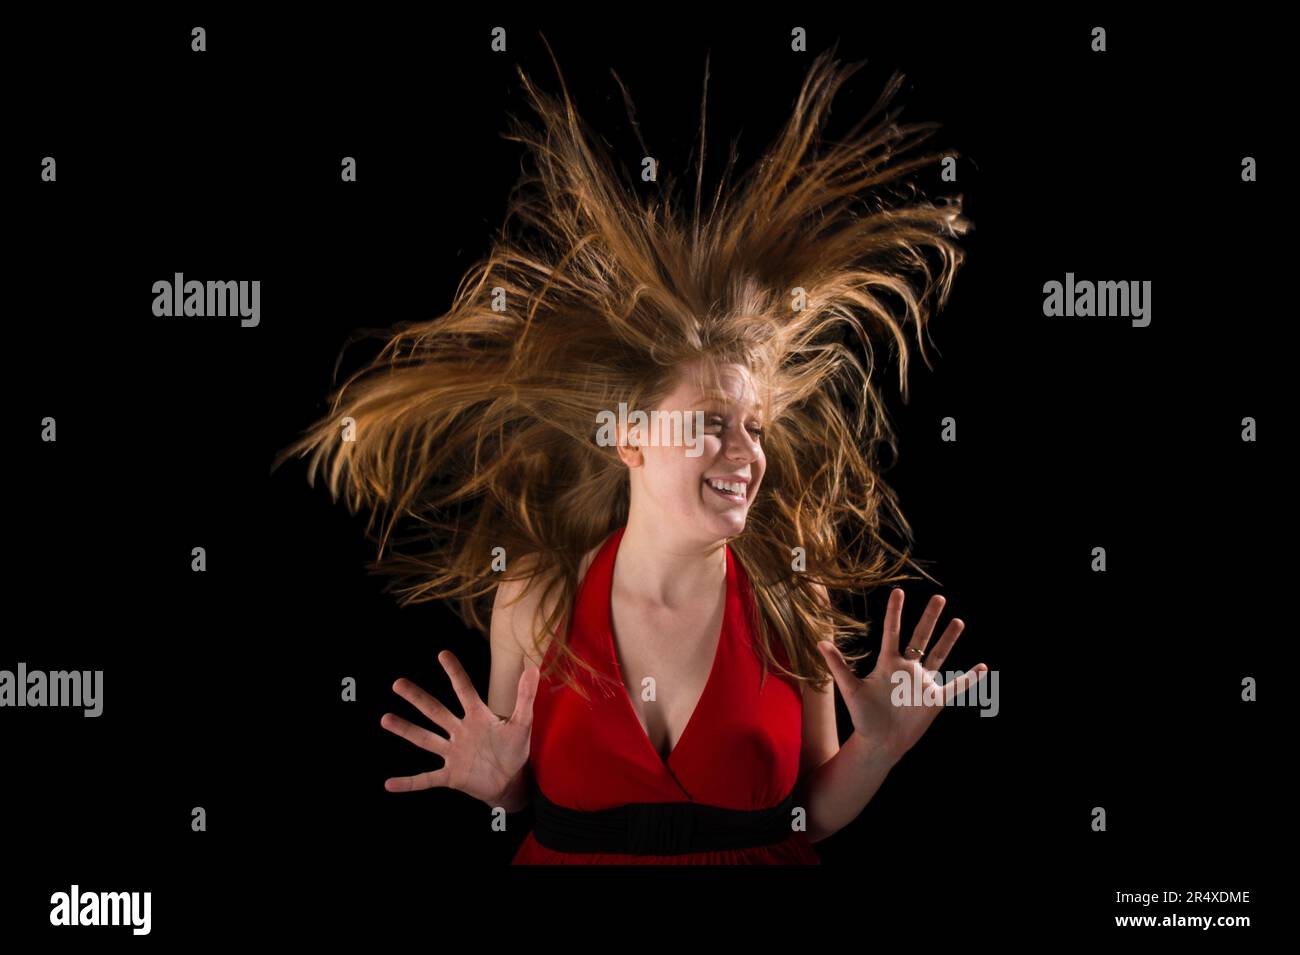 Young woman's hair flies dramatically up around her head; Lincoln, Nebraska, United States of America Stock Photo